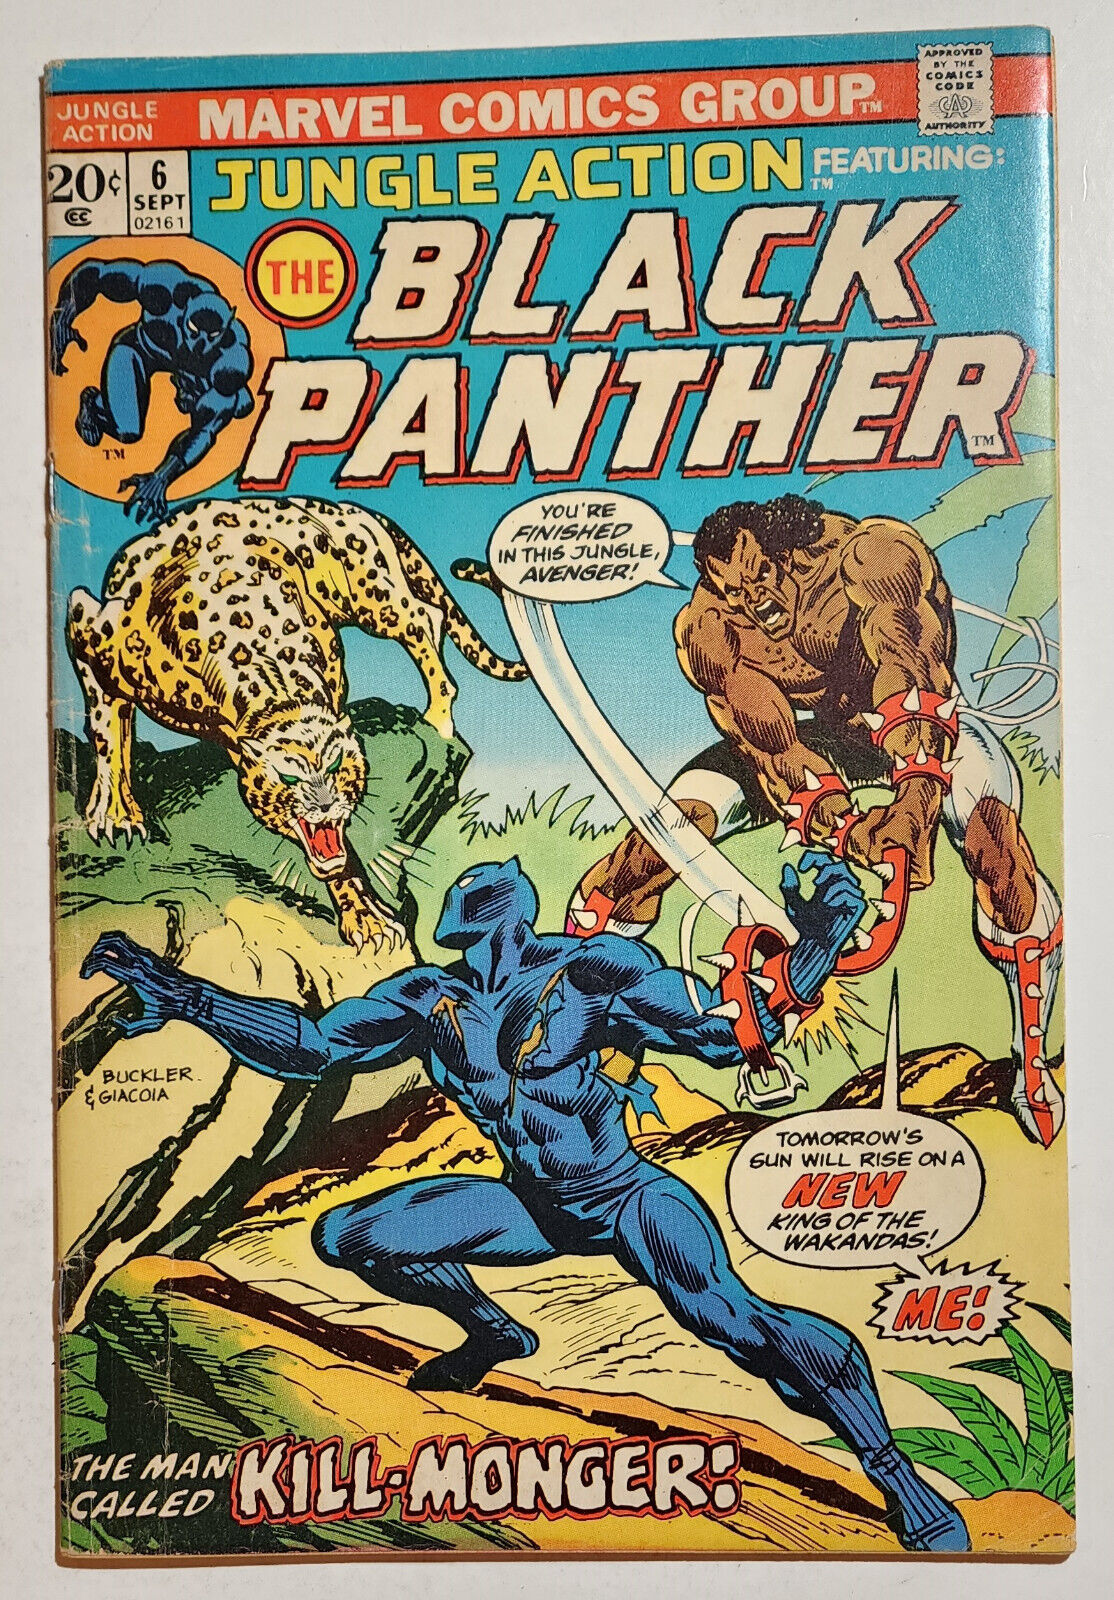 JUNGLE ACTION #6 1973 1st Solo BLACK PANTHER story, 1st appearance KILLMONGER FN